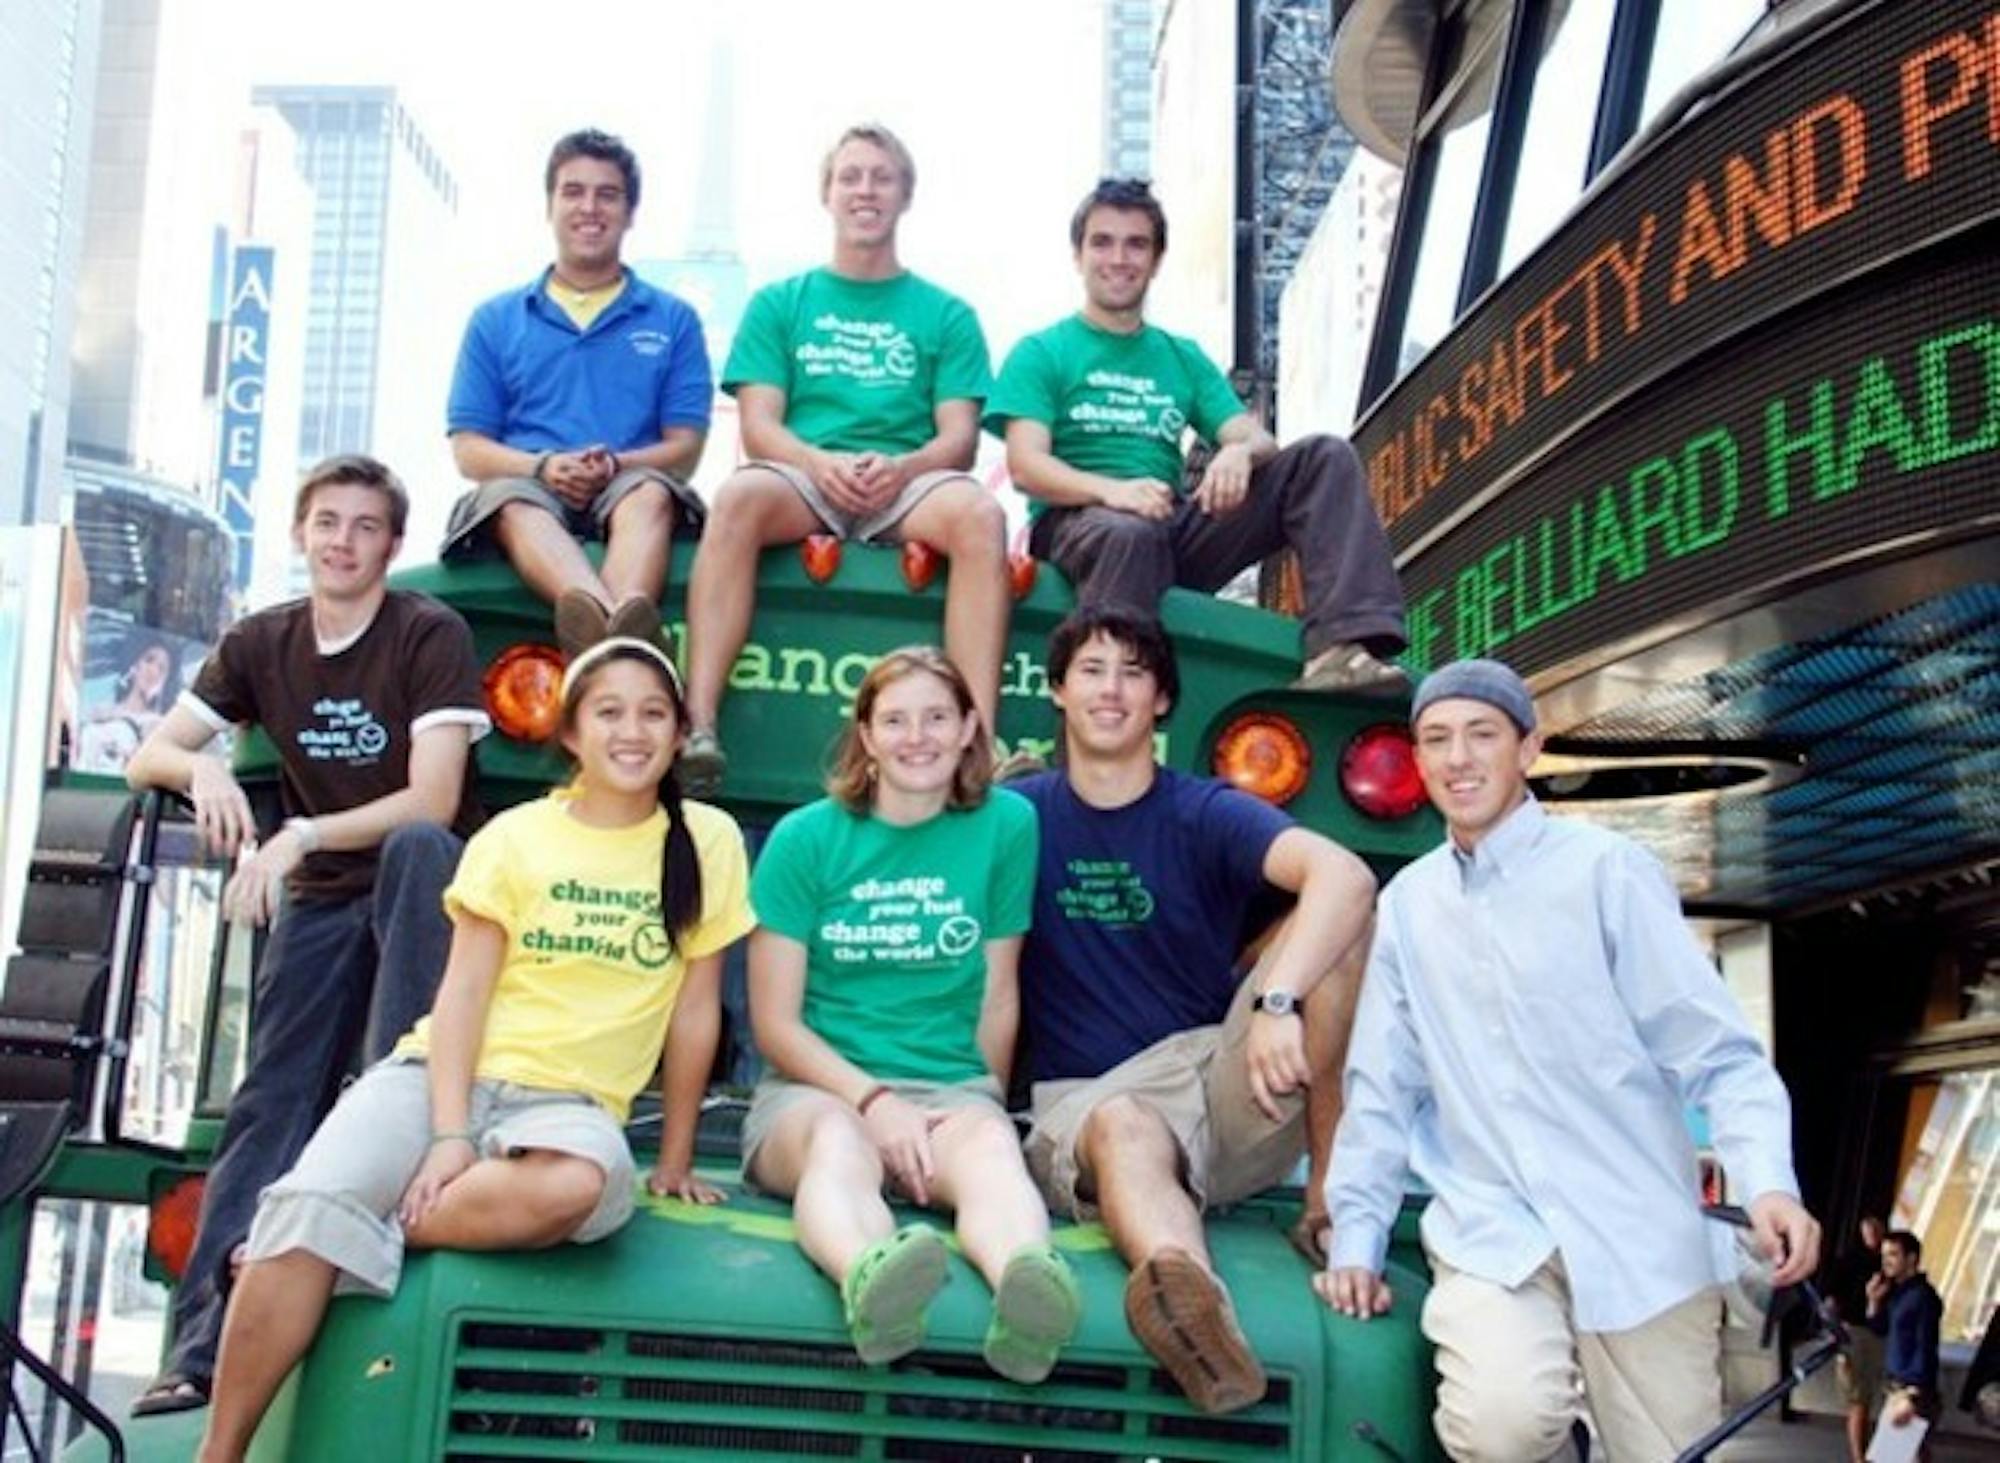 Students accompanying the Big Green Bus pause in Times Square, one of about 50 stops nationwide, to pose with their vegetable-oil powered vehicle.